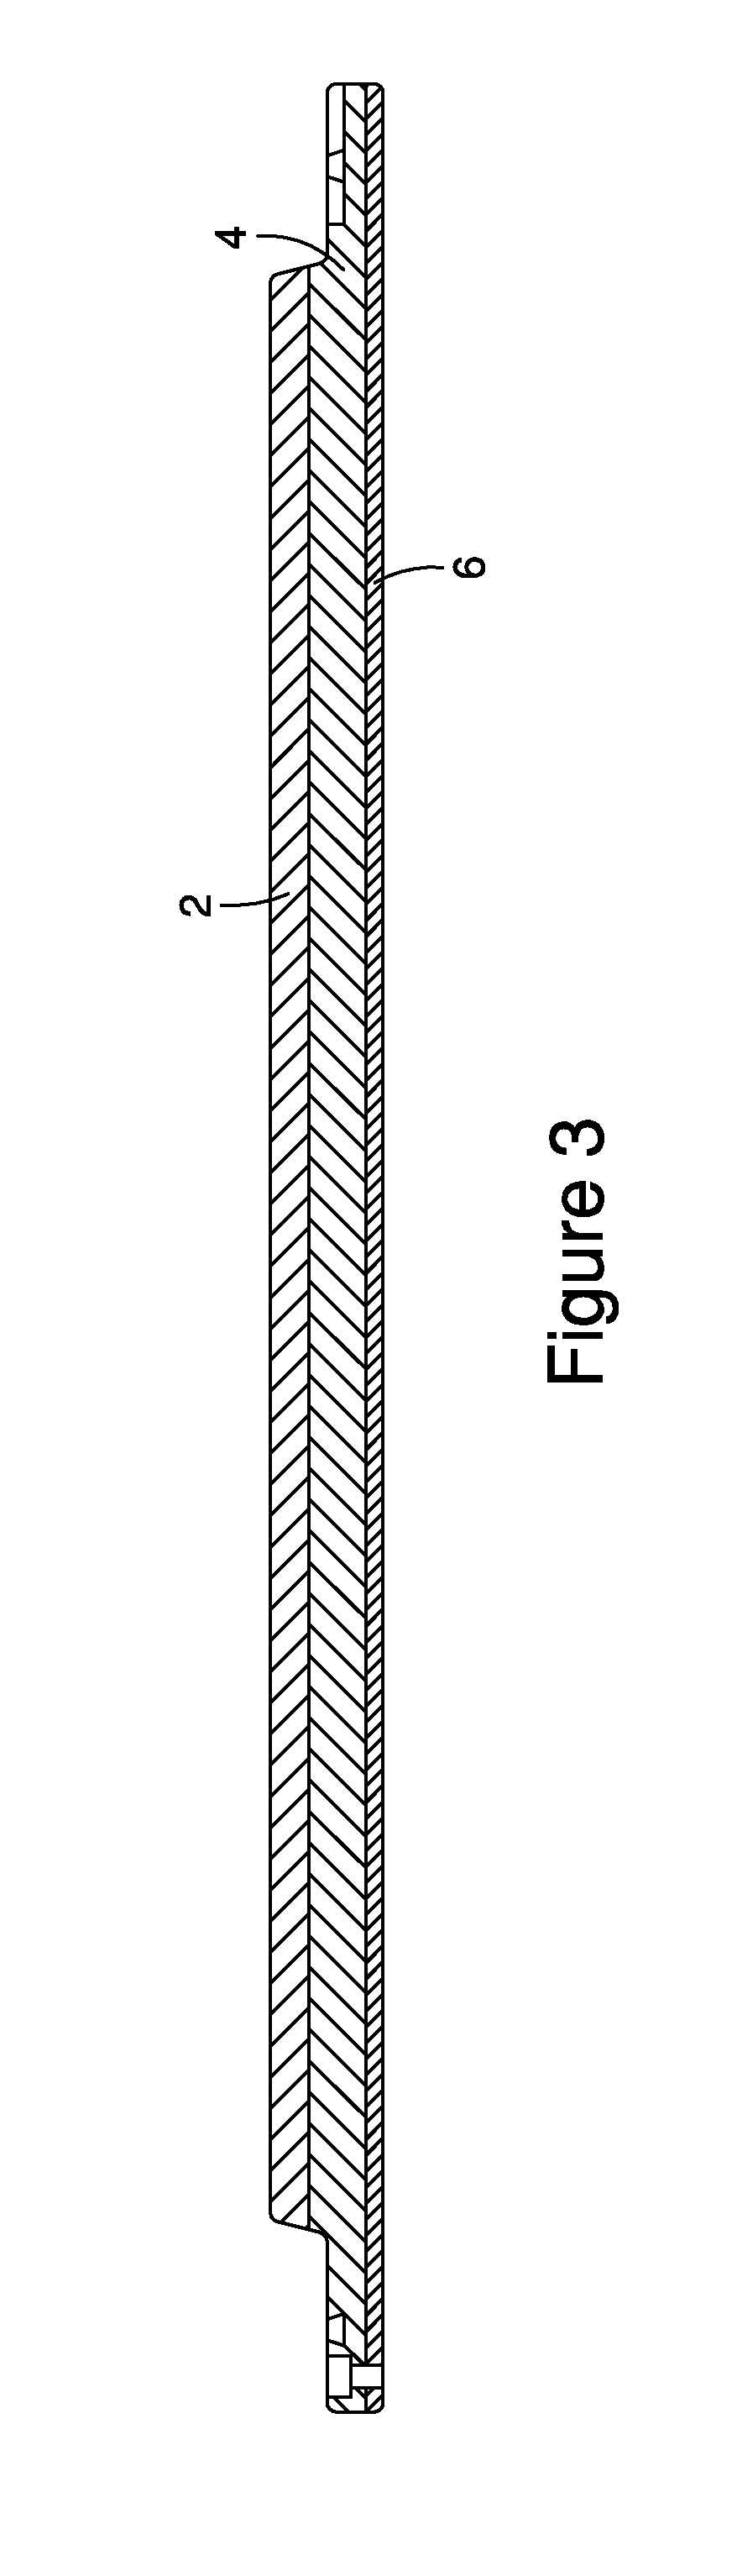 Low deflection sputtering target assembly and methods of making same